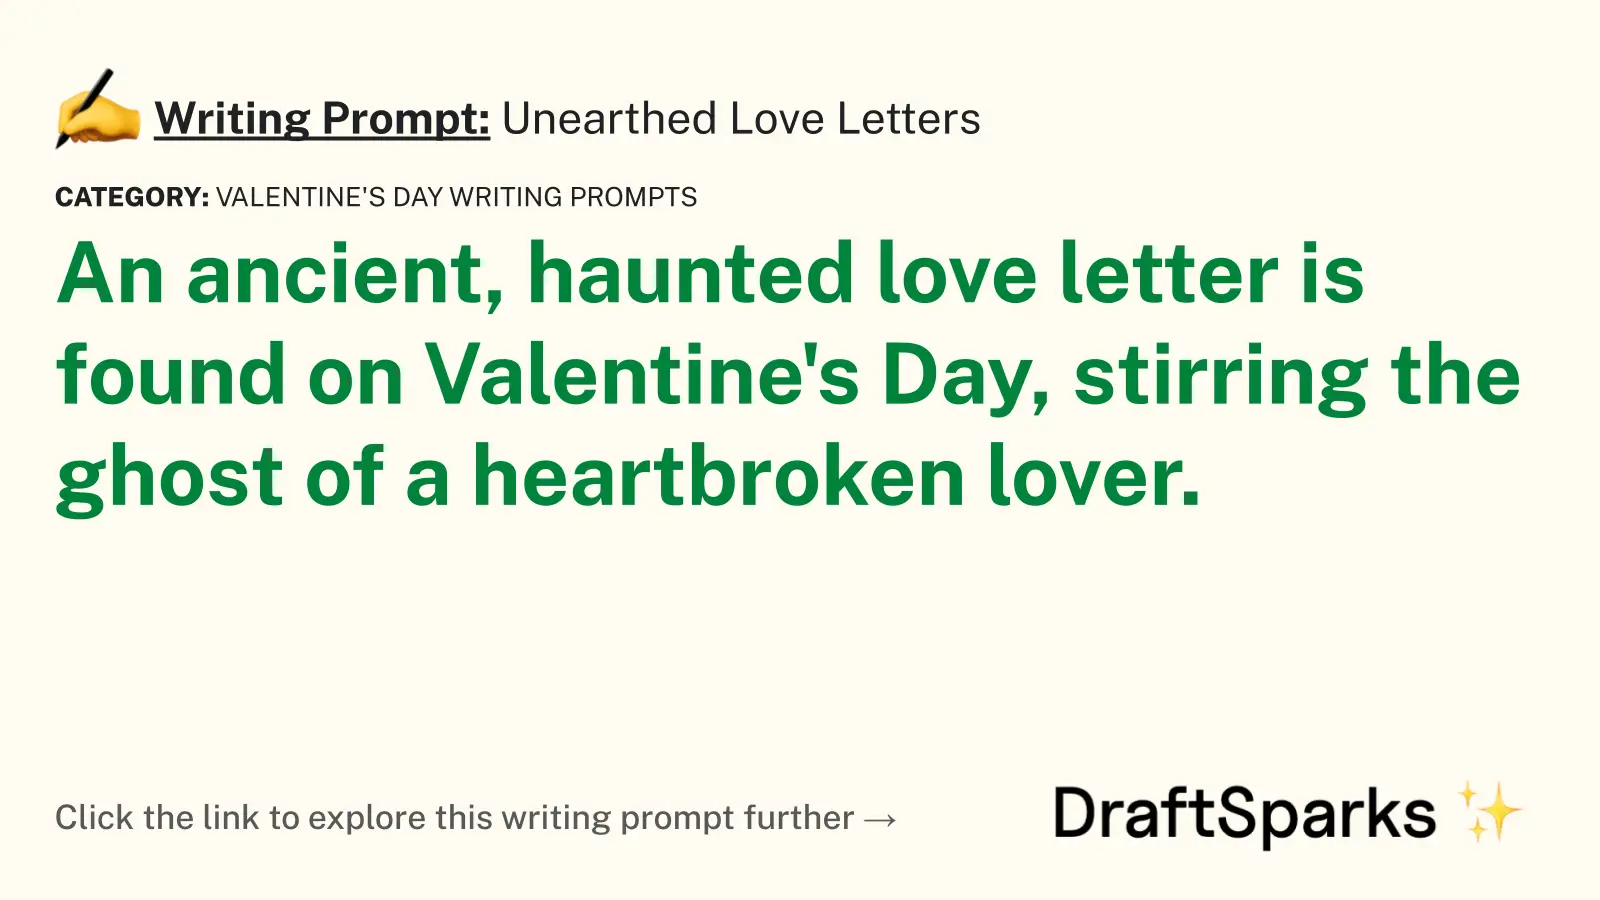 Unearthed Love Letters